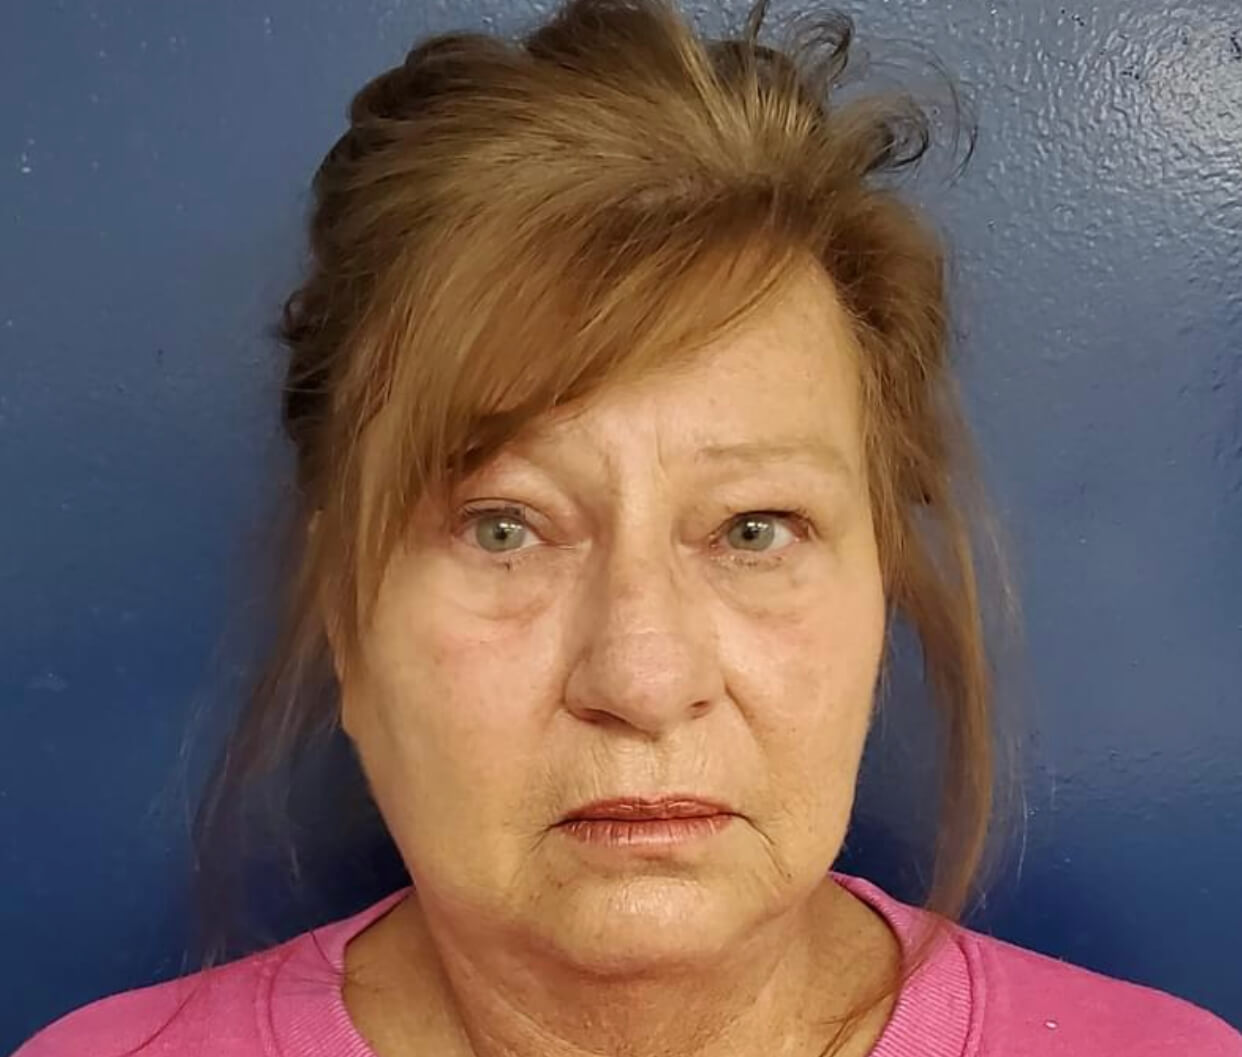 Former NEMCC employee arrested for allegedly stealing nearly $60,000 from college